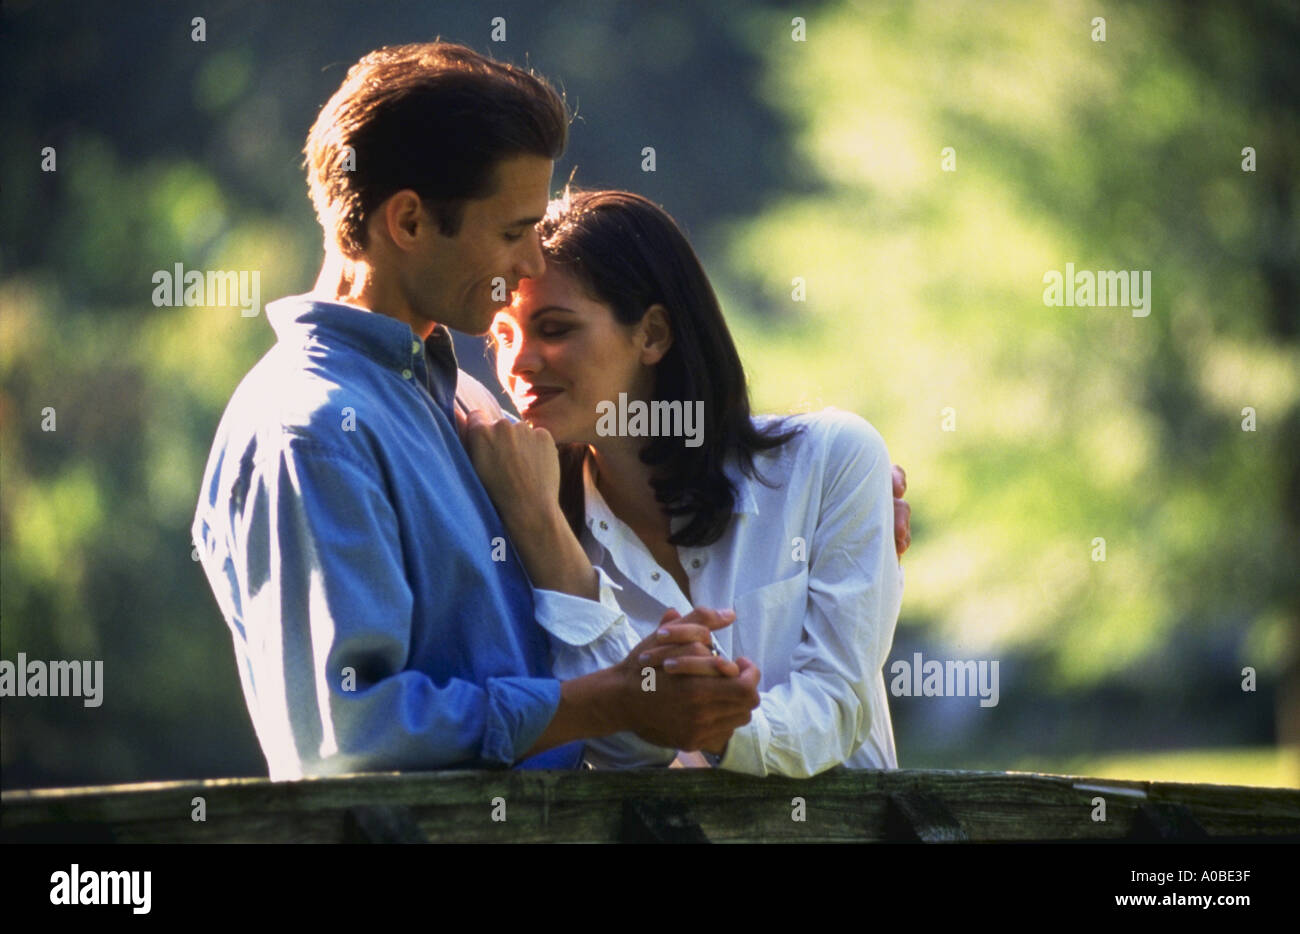 Man and woman holding hands and embracing outdoors Stock Photo